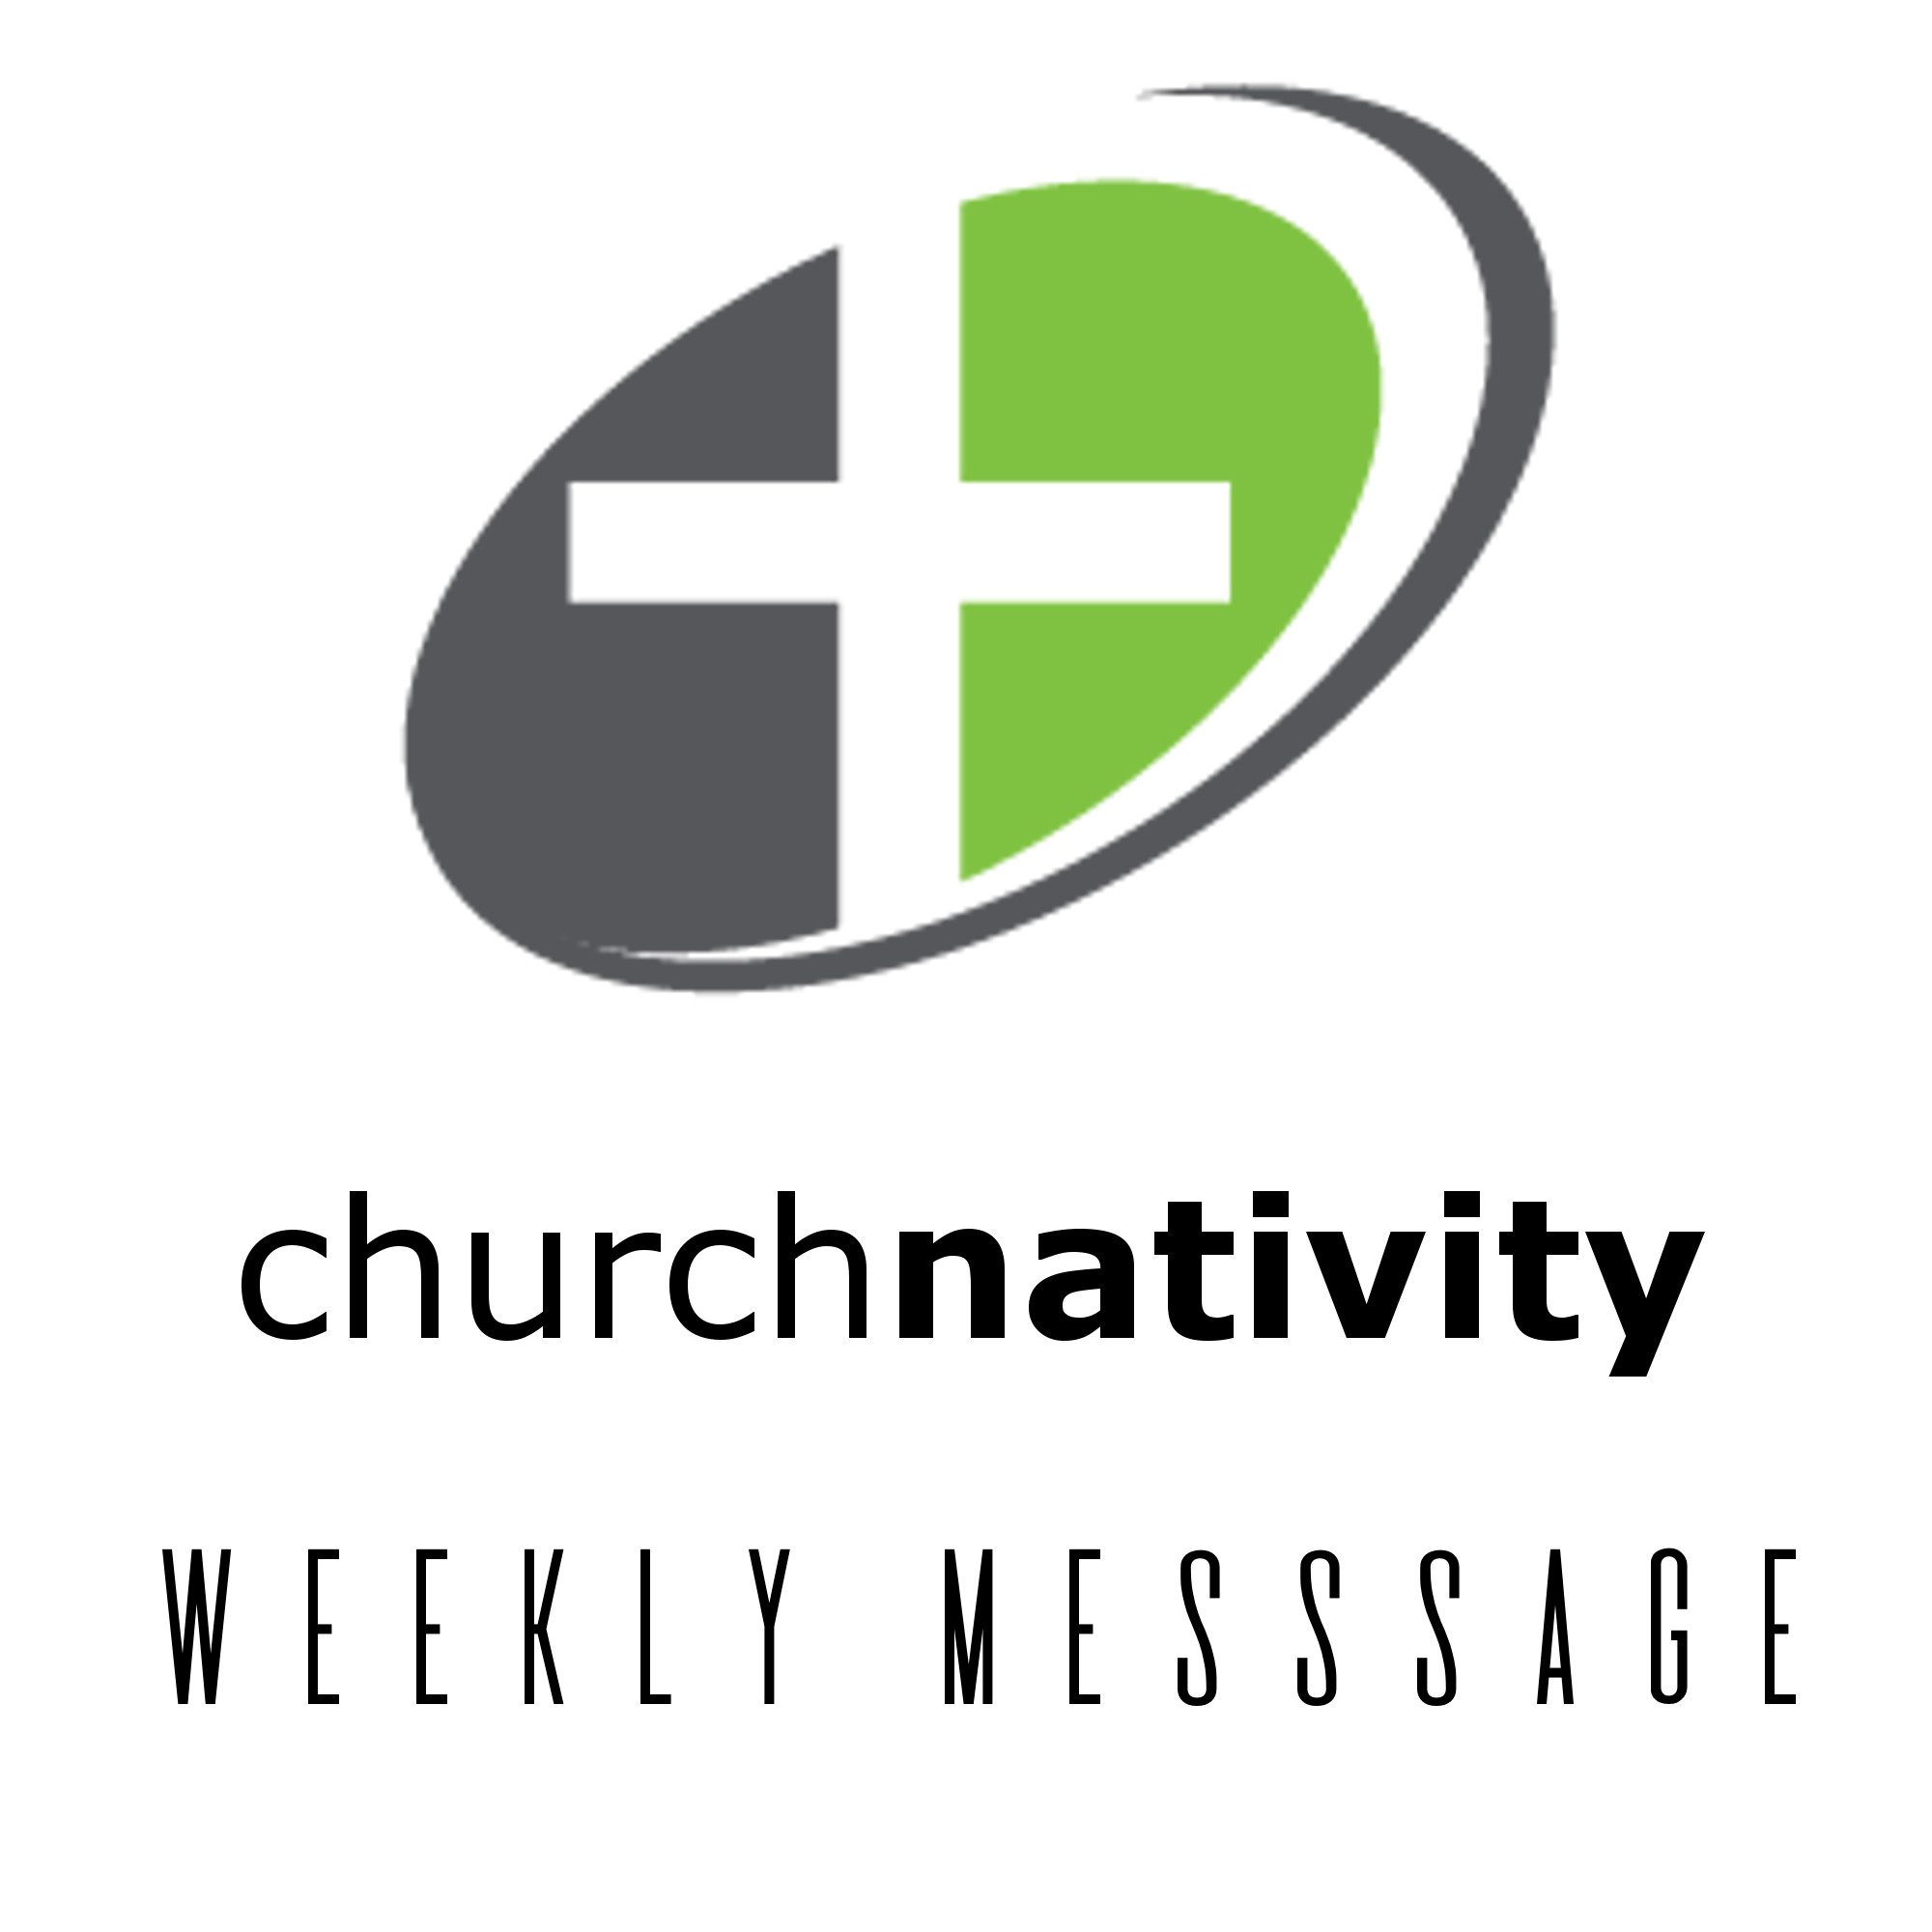 Church Nativity Weekly Message - Bad Guys of the Bible Week 2